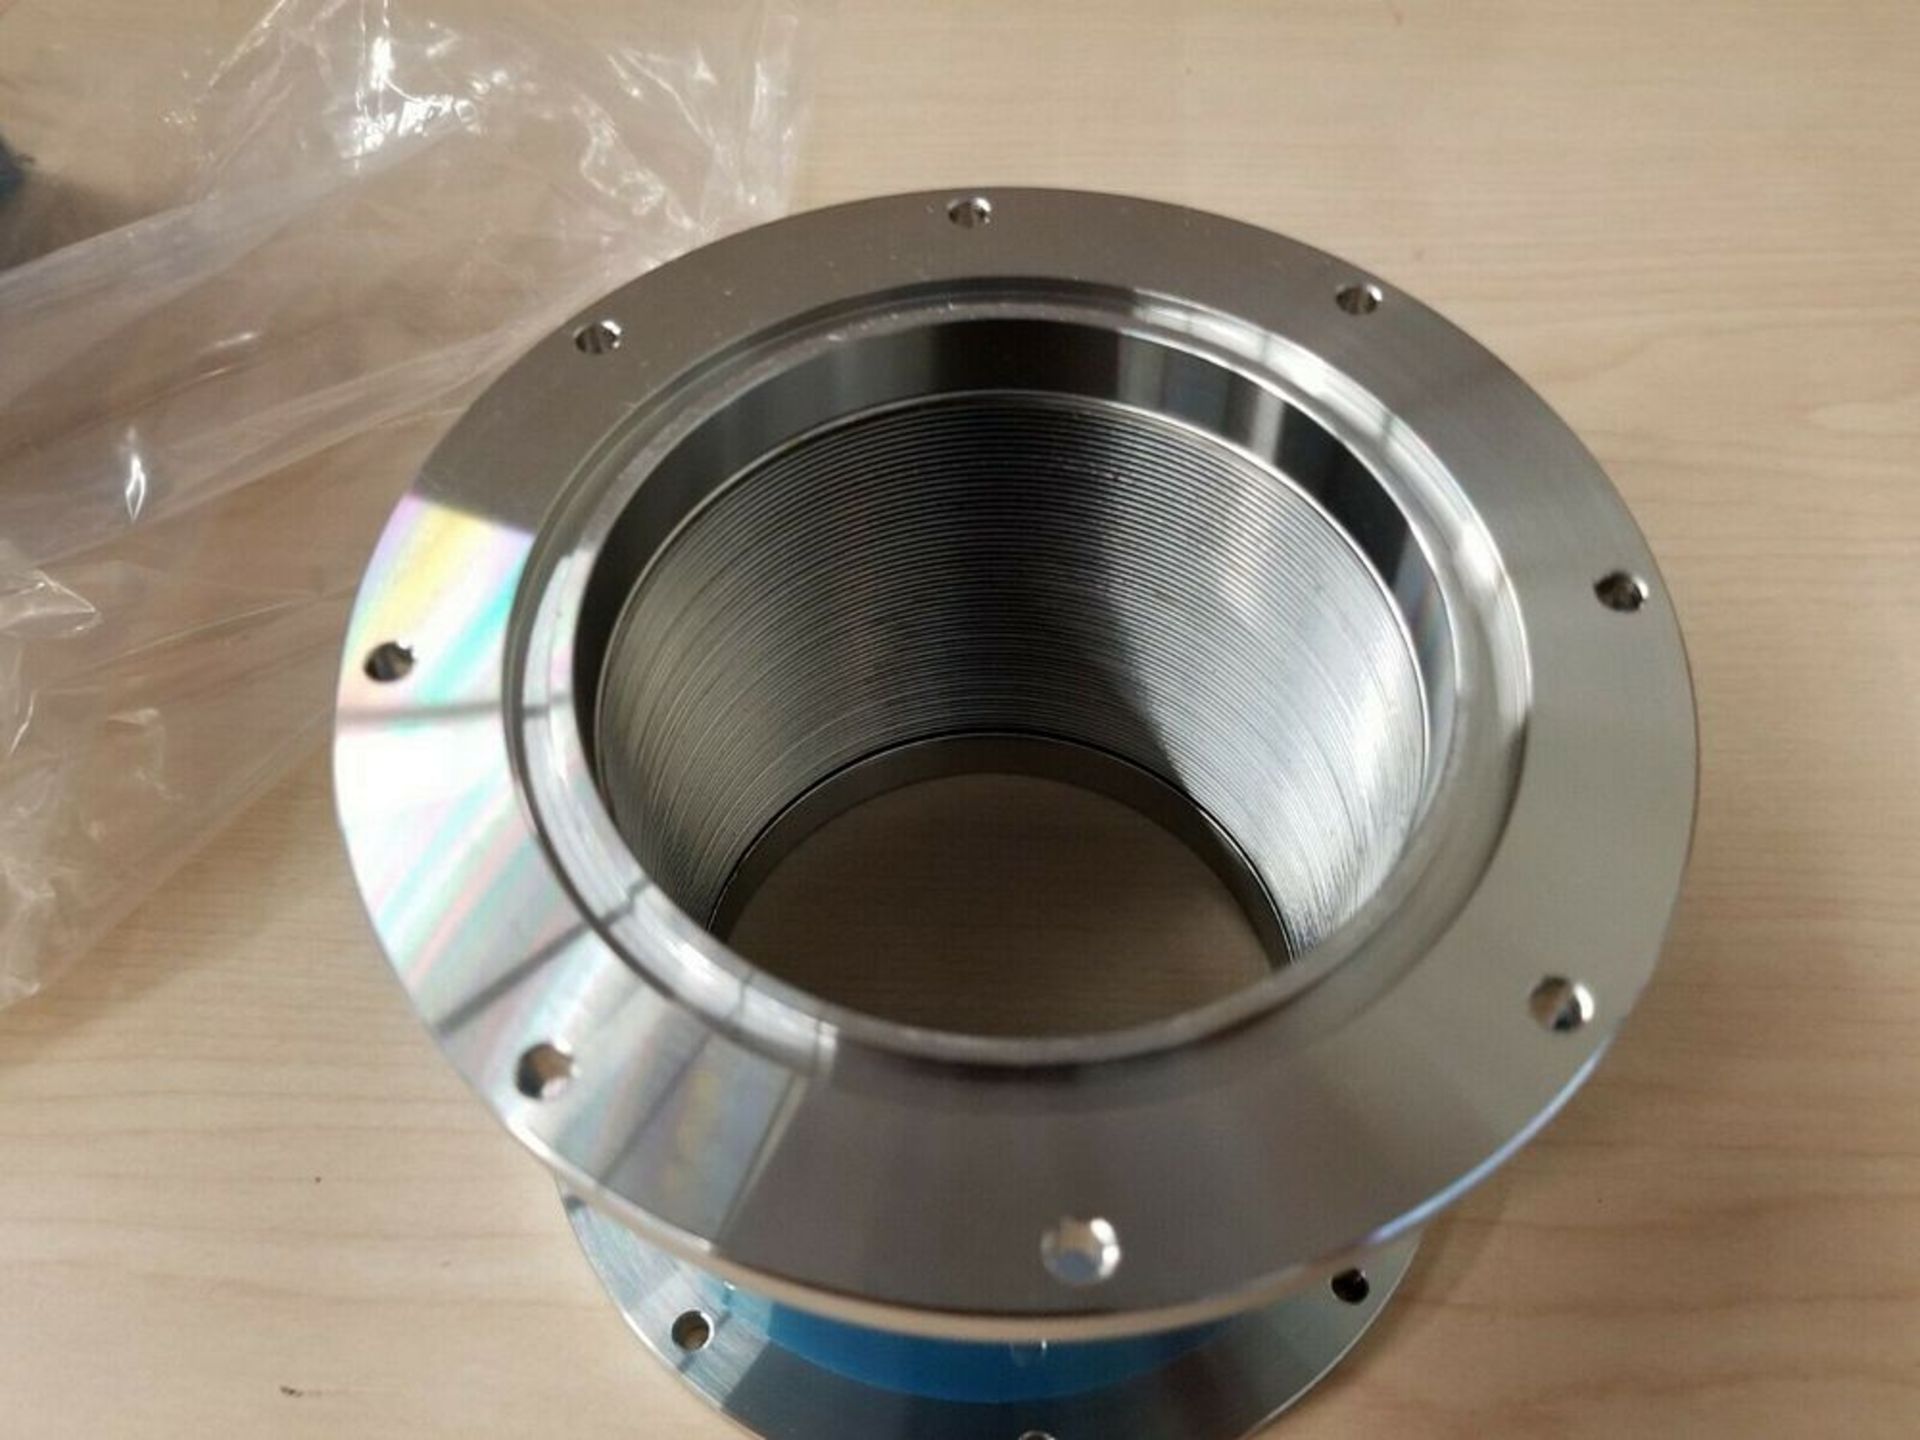 NEW EAGLE STAINLESS STEEL VACUUM BELLOWS FLANGE - Image 6 of 8